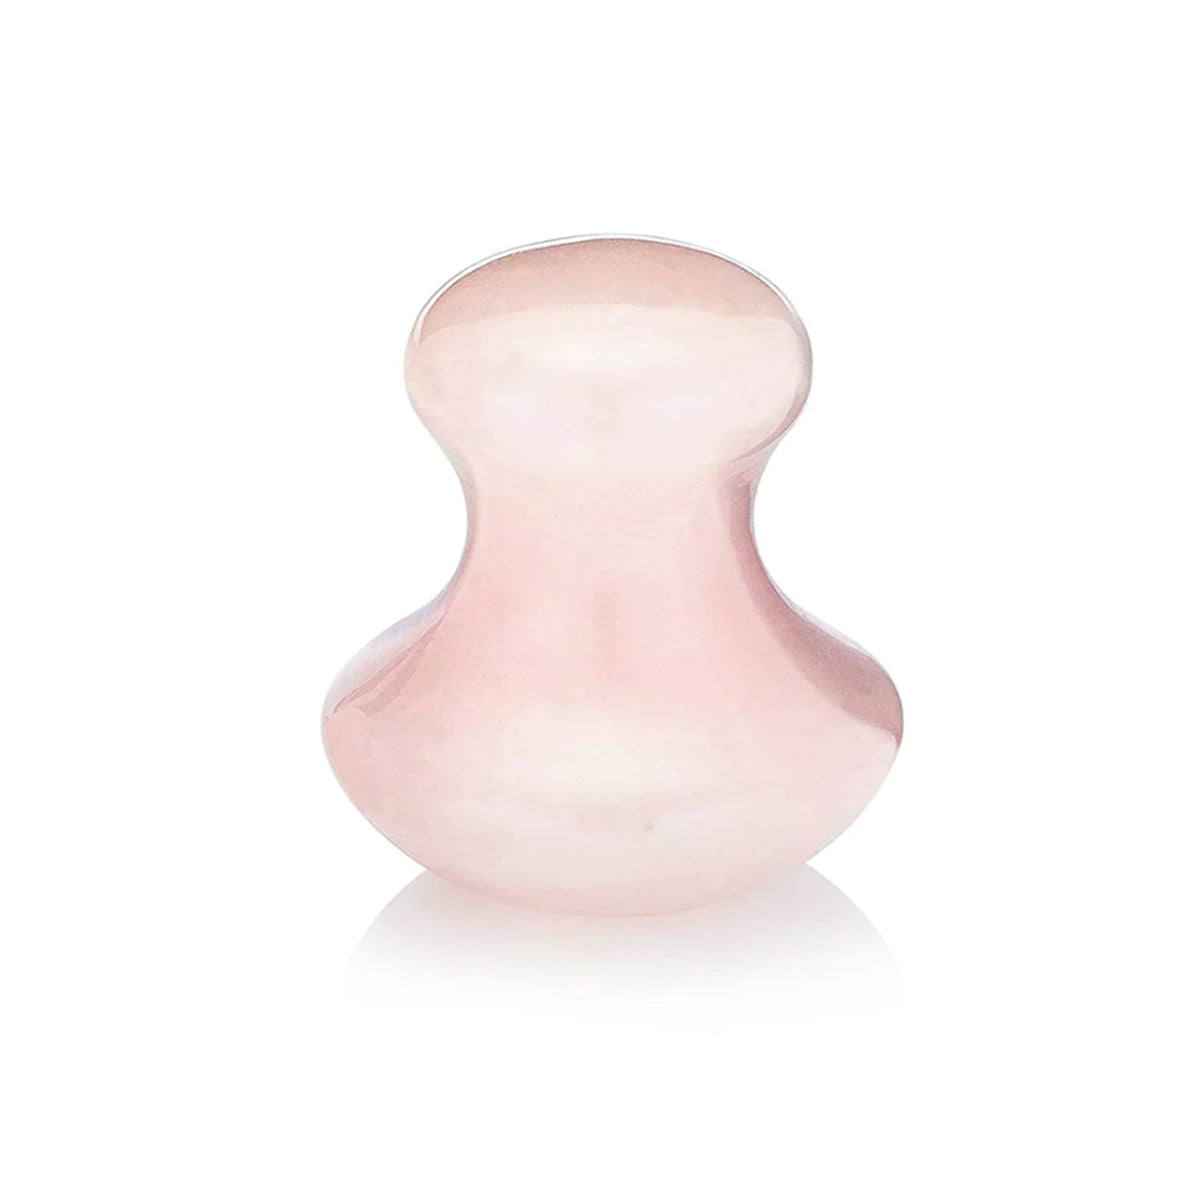 Paavani Ayurveda - Rose Quartz Facial Tool, Hand-Carved and Polished Massage Tool, Face and Eye